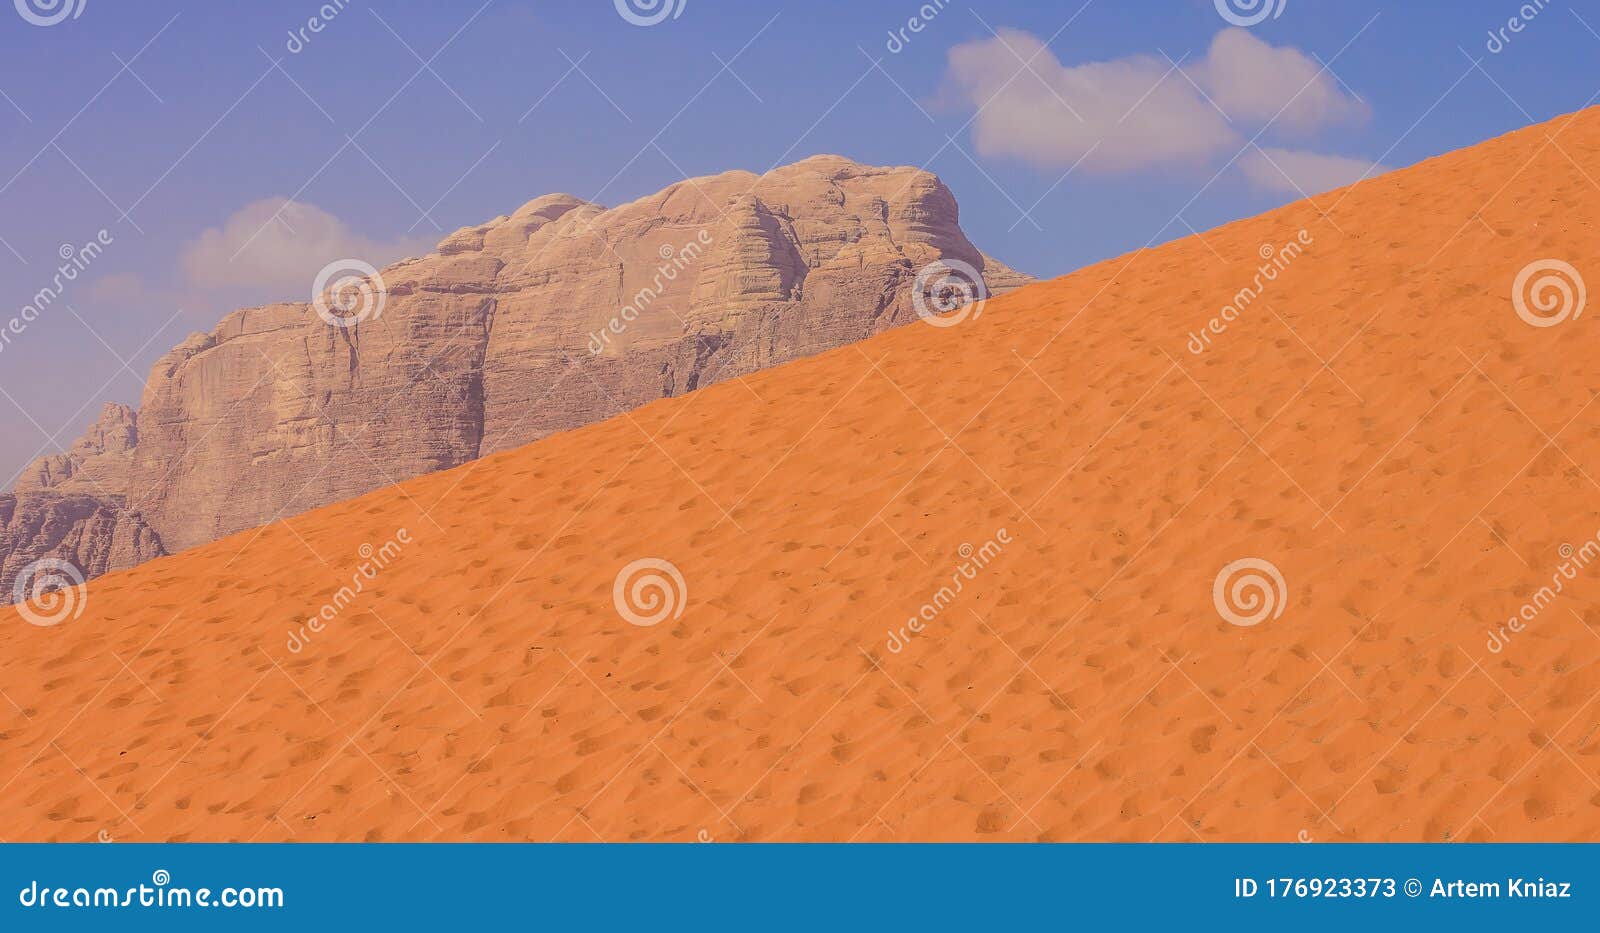 Picturesque Panoramic Landscape Wadi Rum Jordan Desert Nature Photography  Sand Dune Hill And Rocky Bare Mountain Background Scenic Stock Image -  Image of arab, beautiful: 176923373